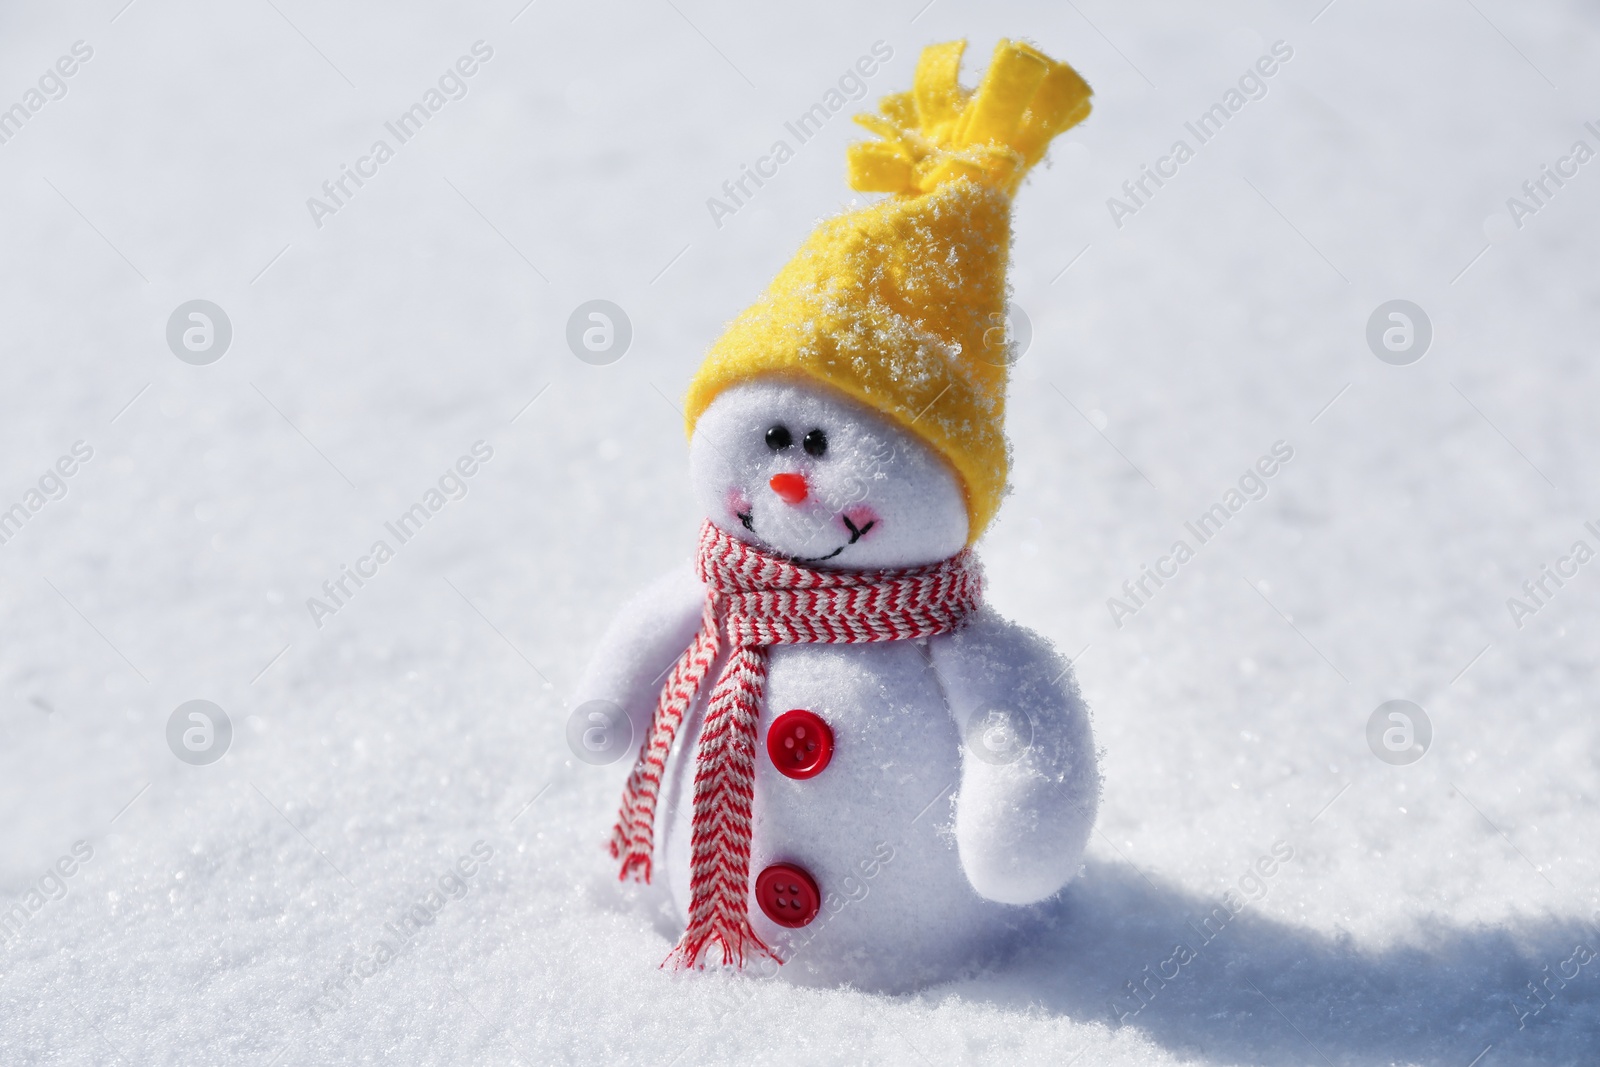 Photo of Cute small decorative snowman on snow outdoors